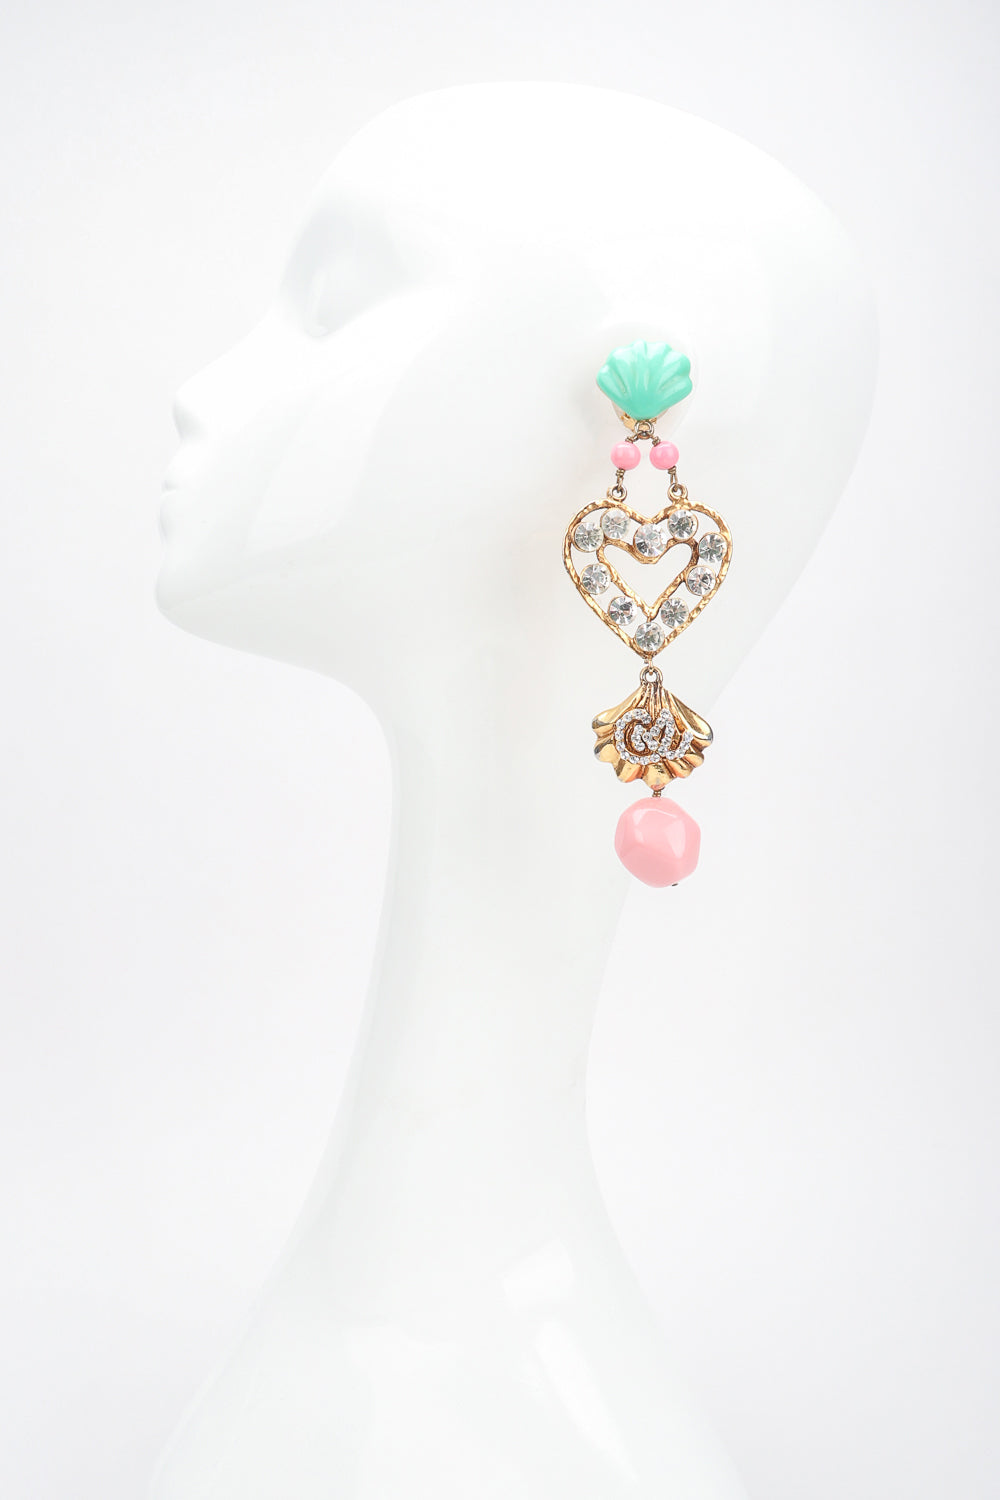 Recess Los Angeles Designer Consignment Resale Recycling Vintage Christian Lacroix Mermaid Shell Crystal Heart Drop Earrings